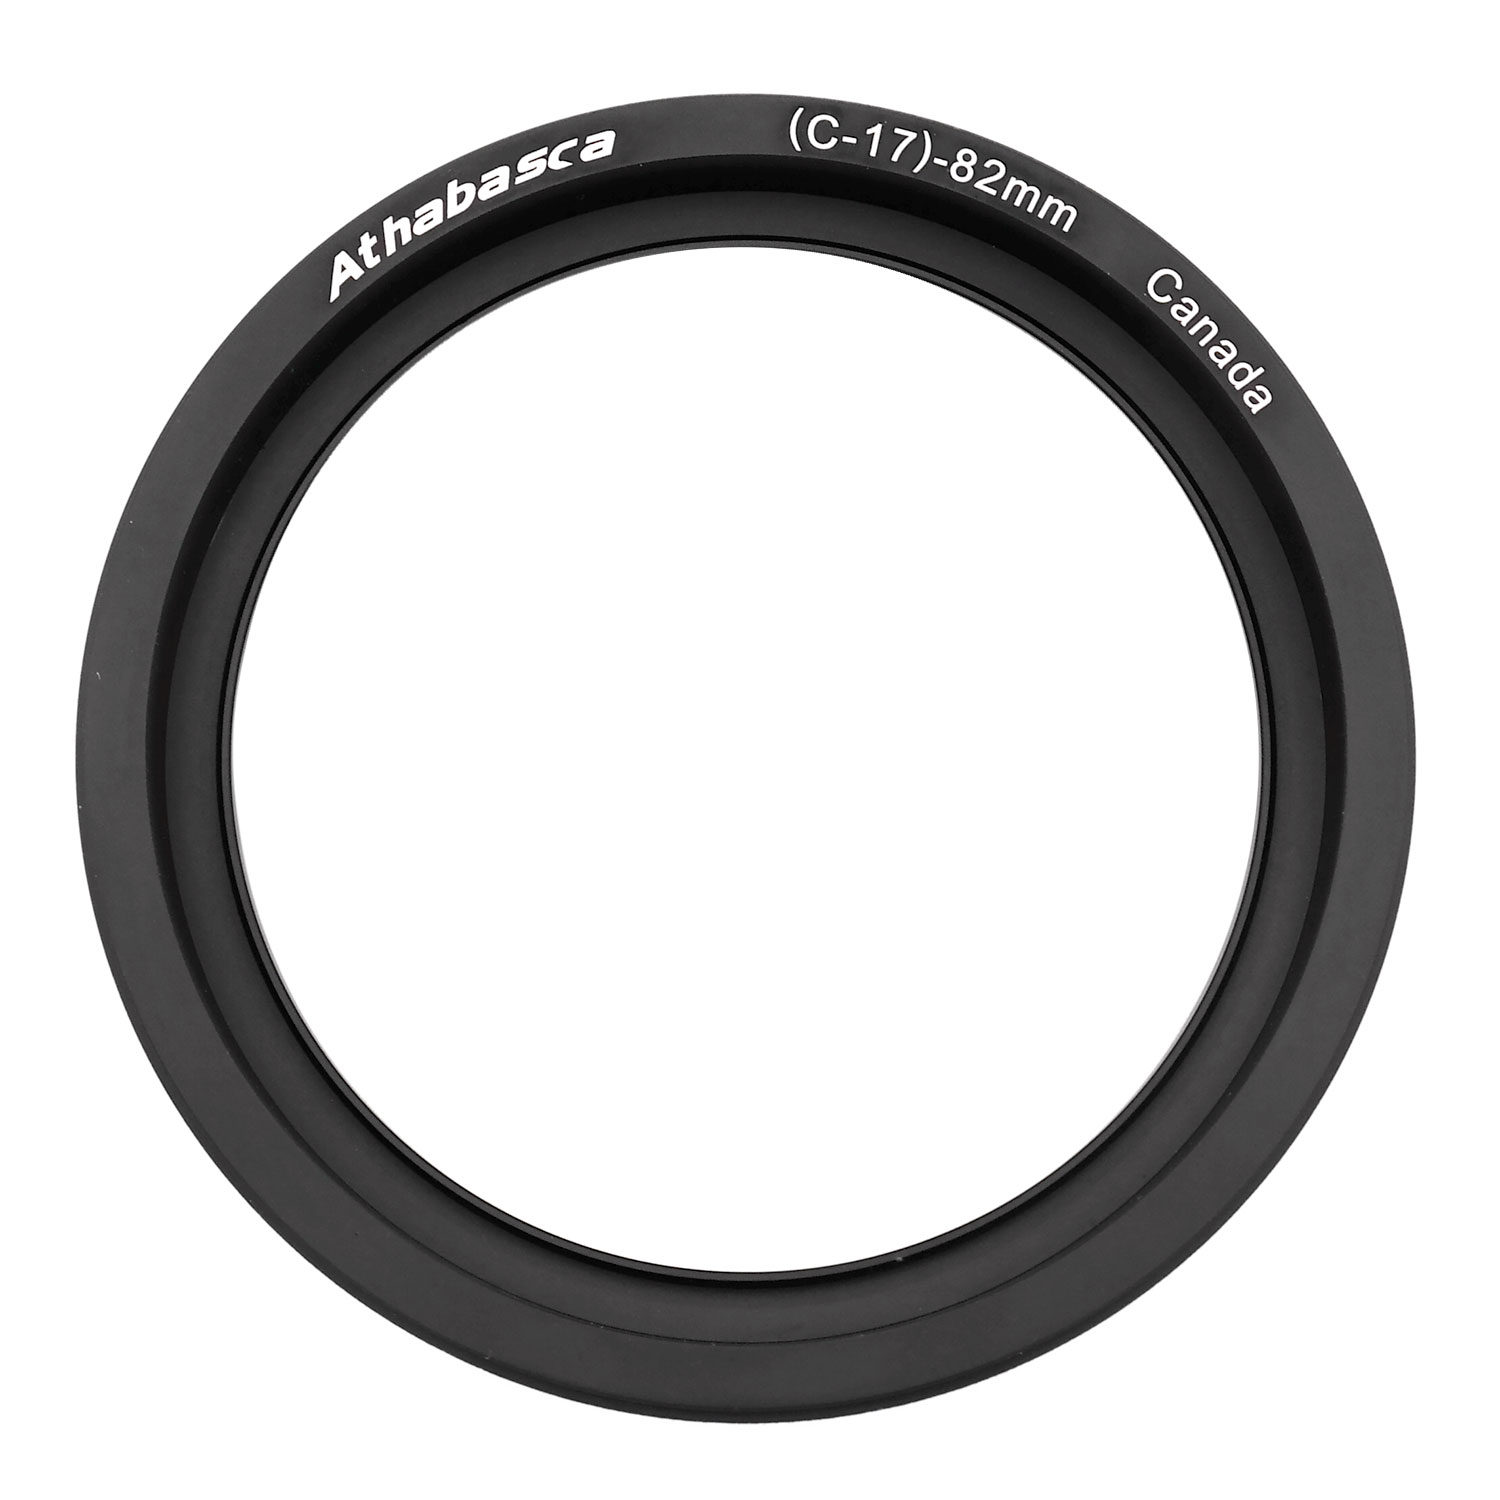 Image of Athabasca Adapterring 82mm voor Canon TS-E 17mm Filter Adapter System